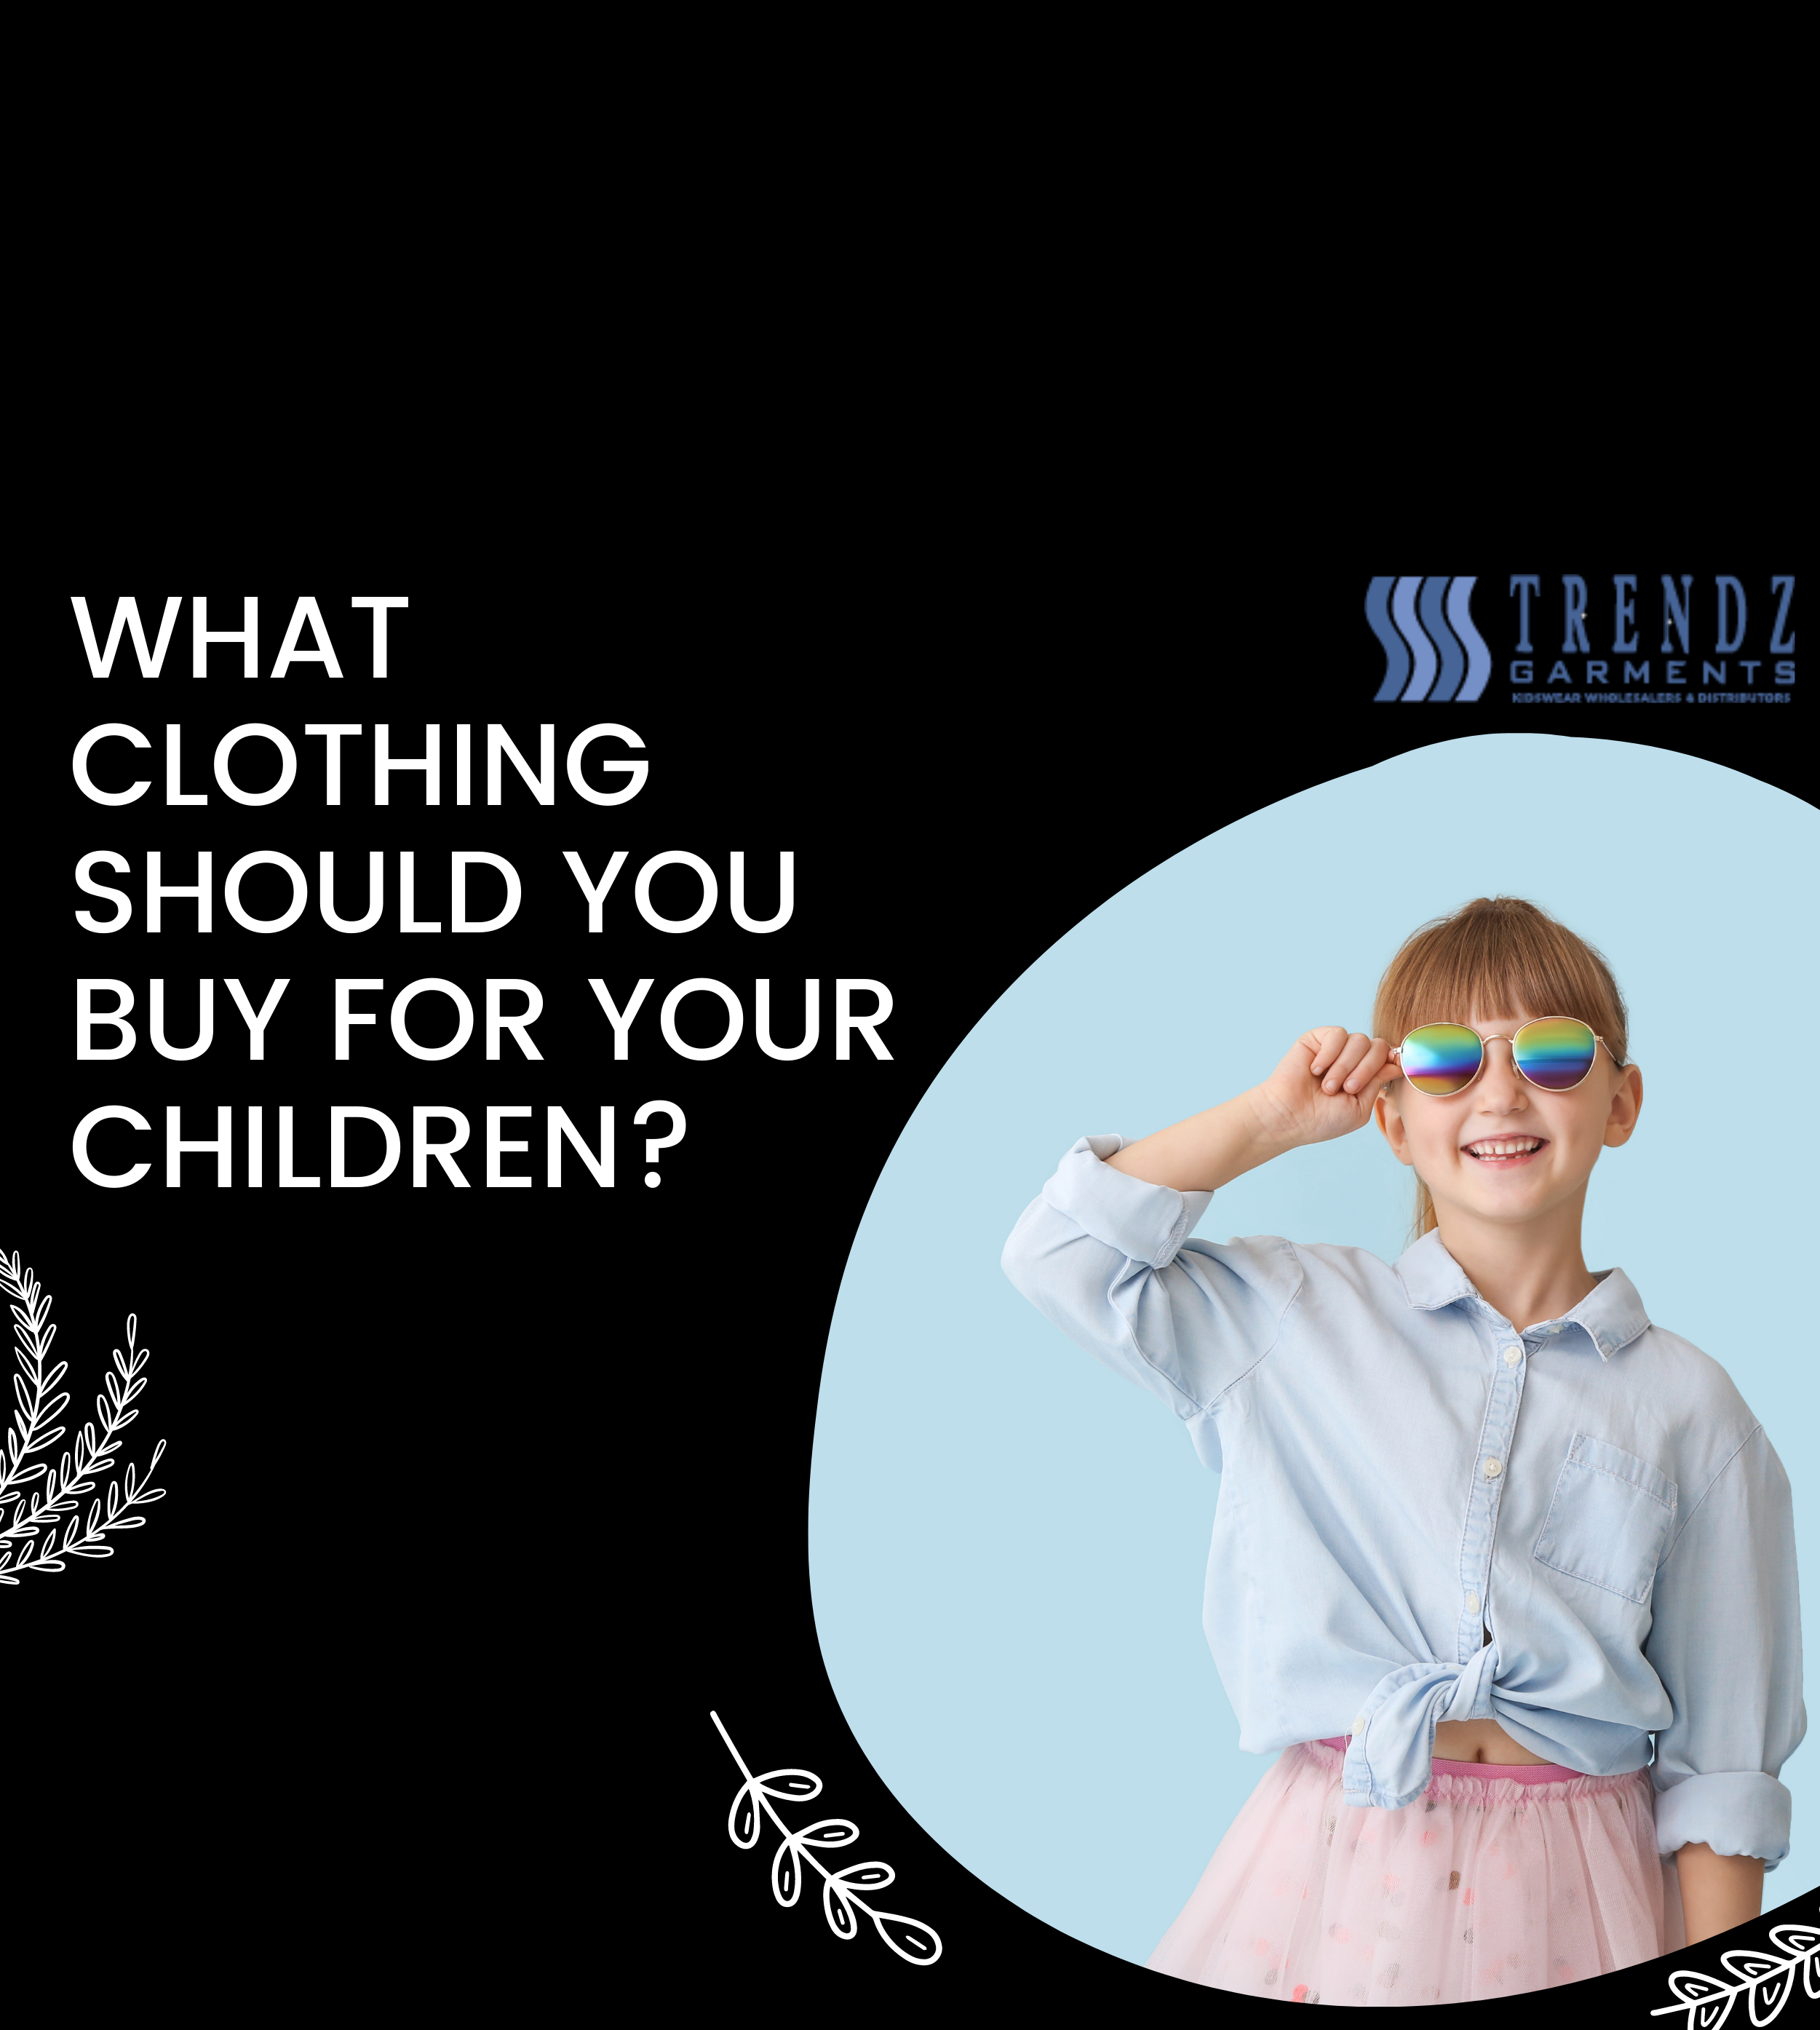 clothing should you buy for your children